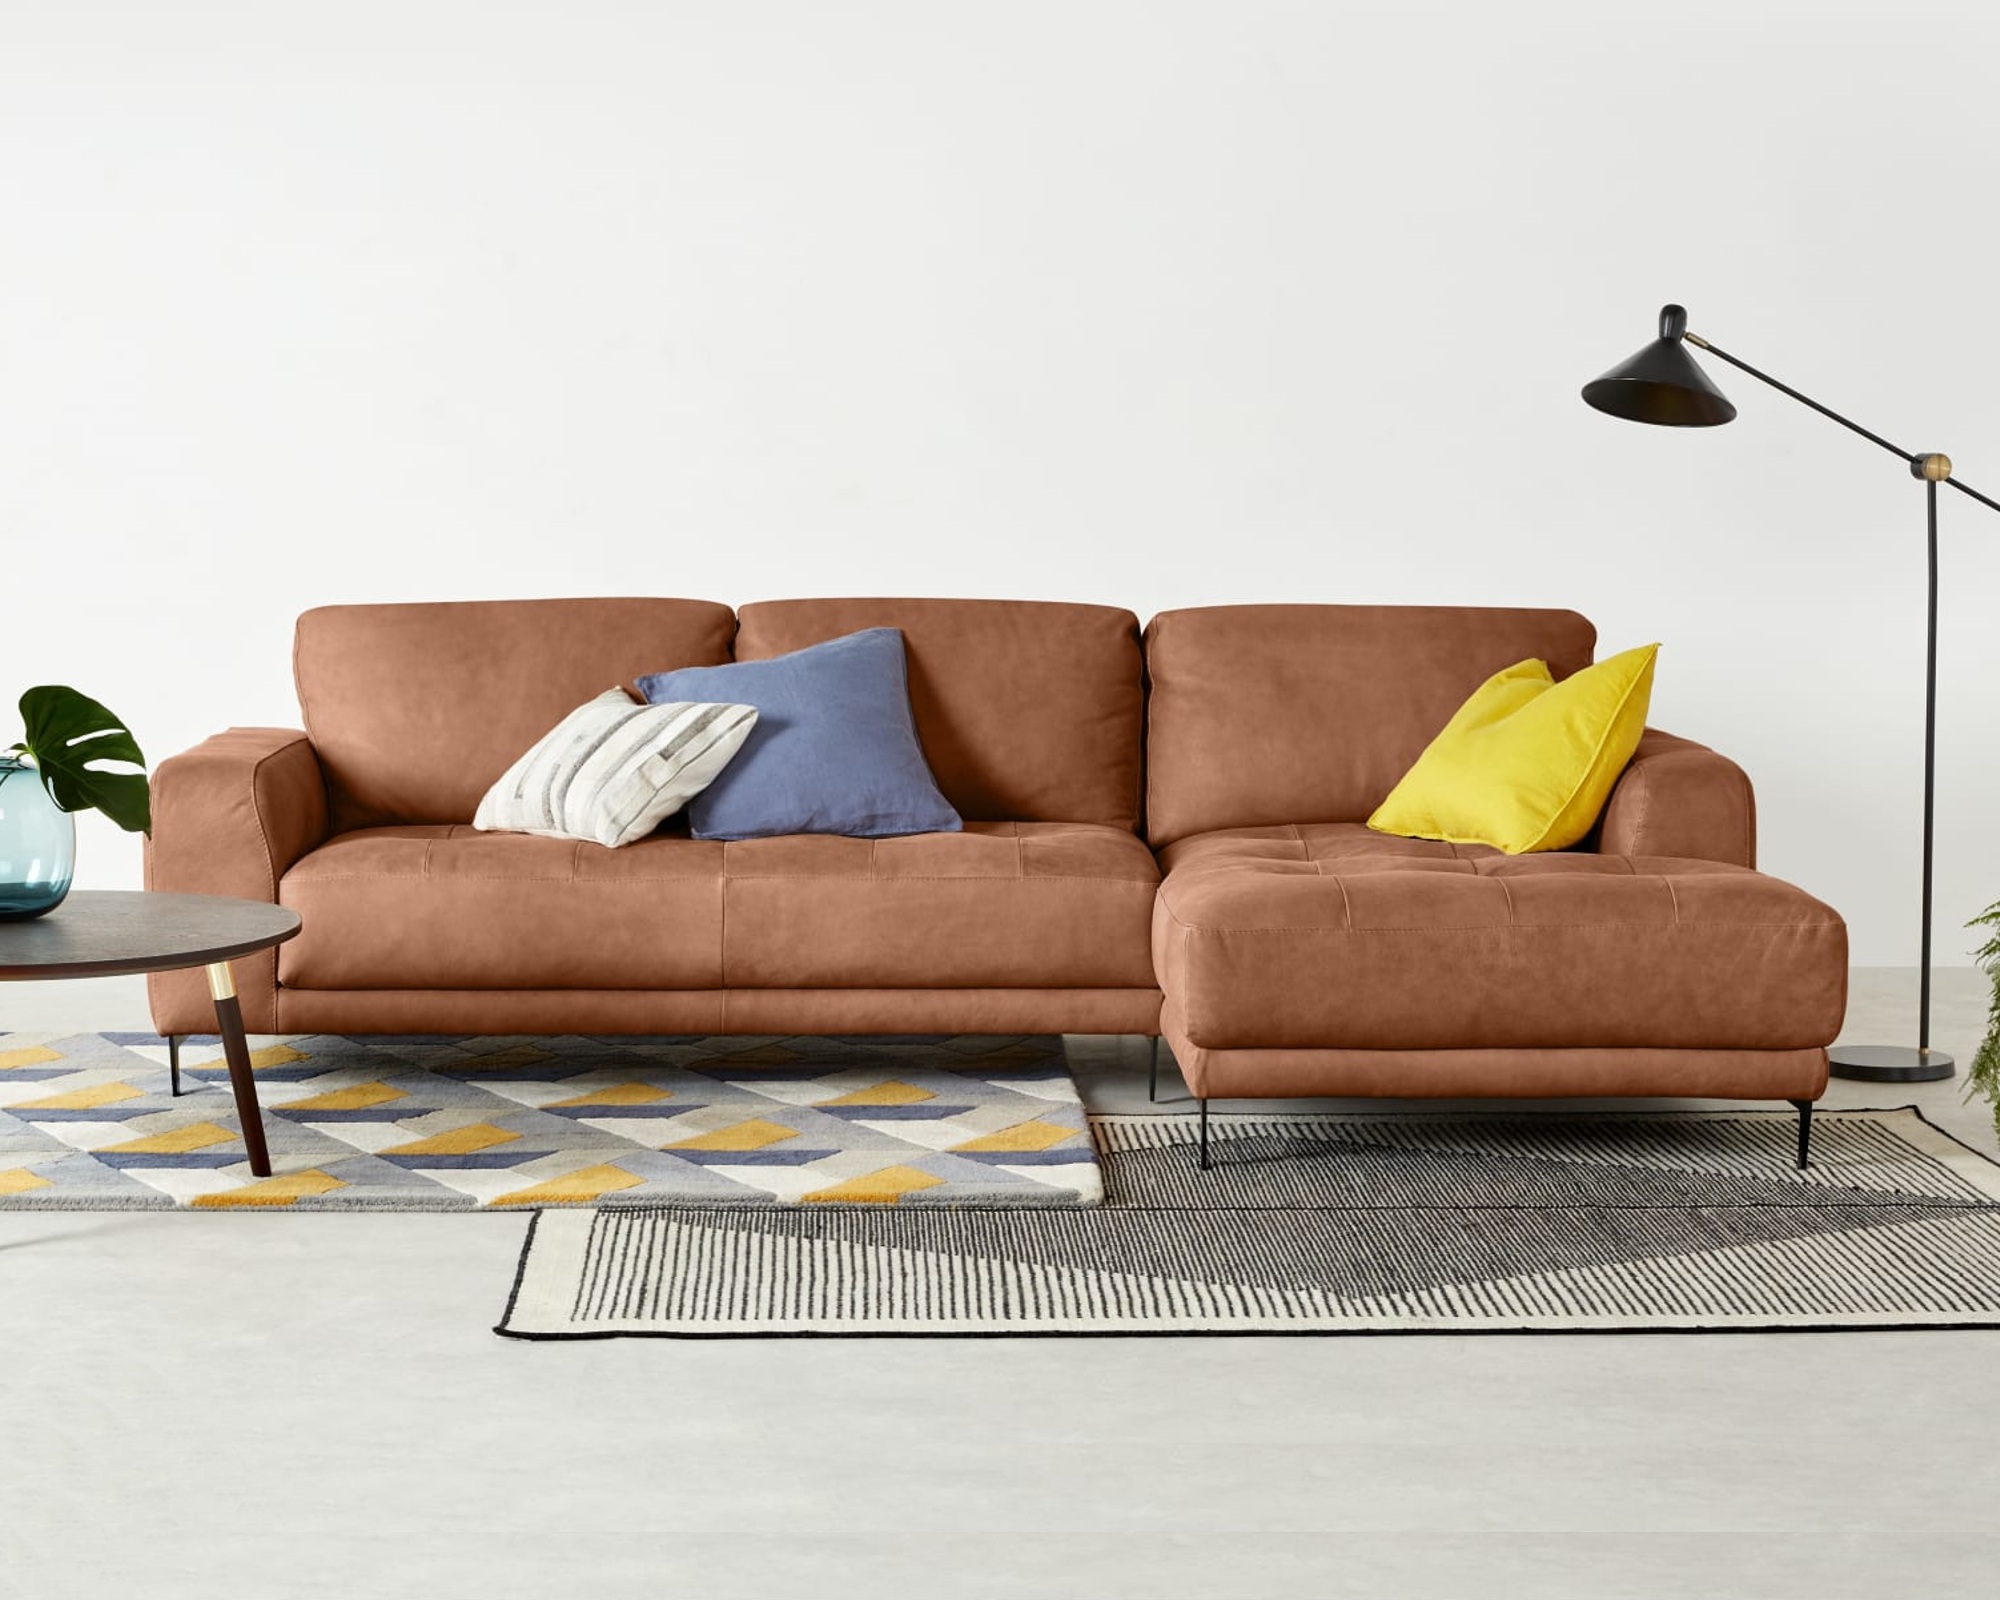 A tan leather sofa with chaise section in a modern living room